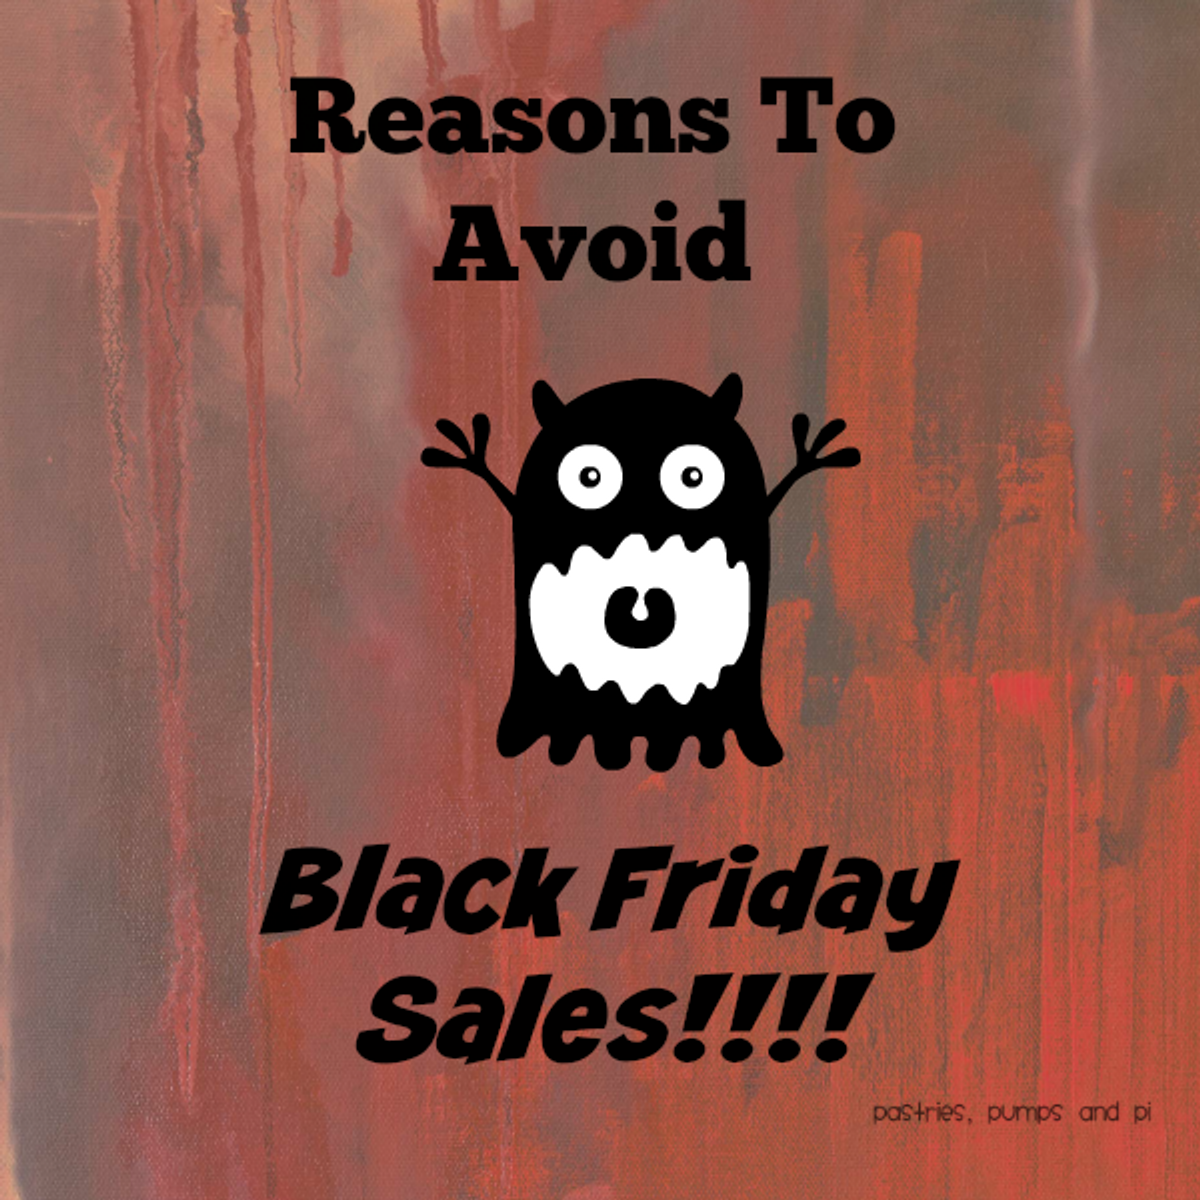 Why Everyone Should Avoid Black Friday